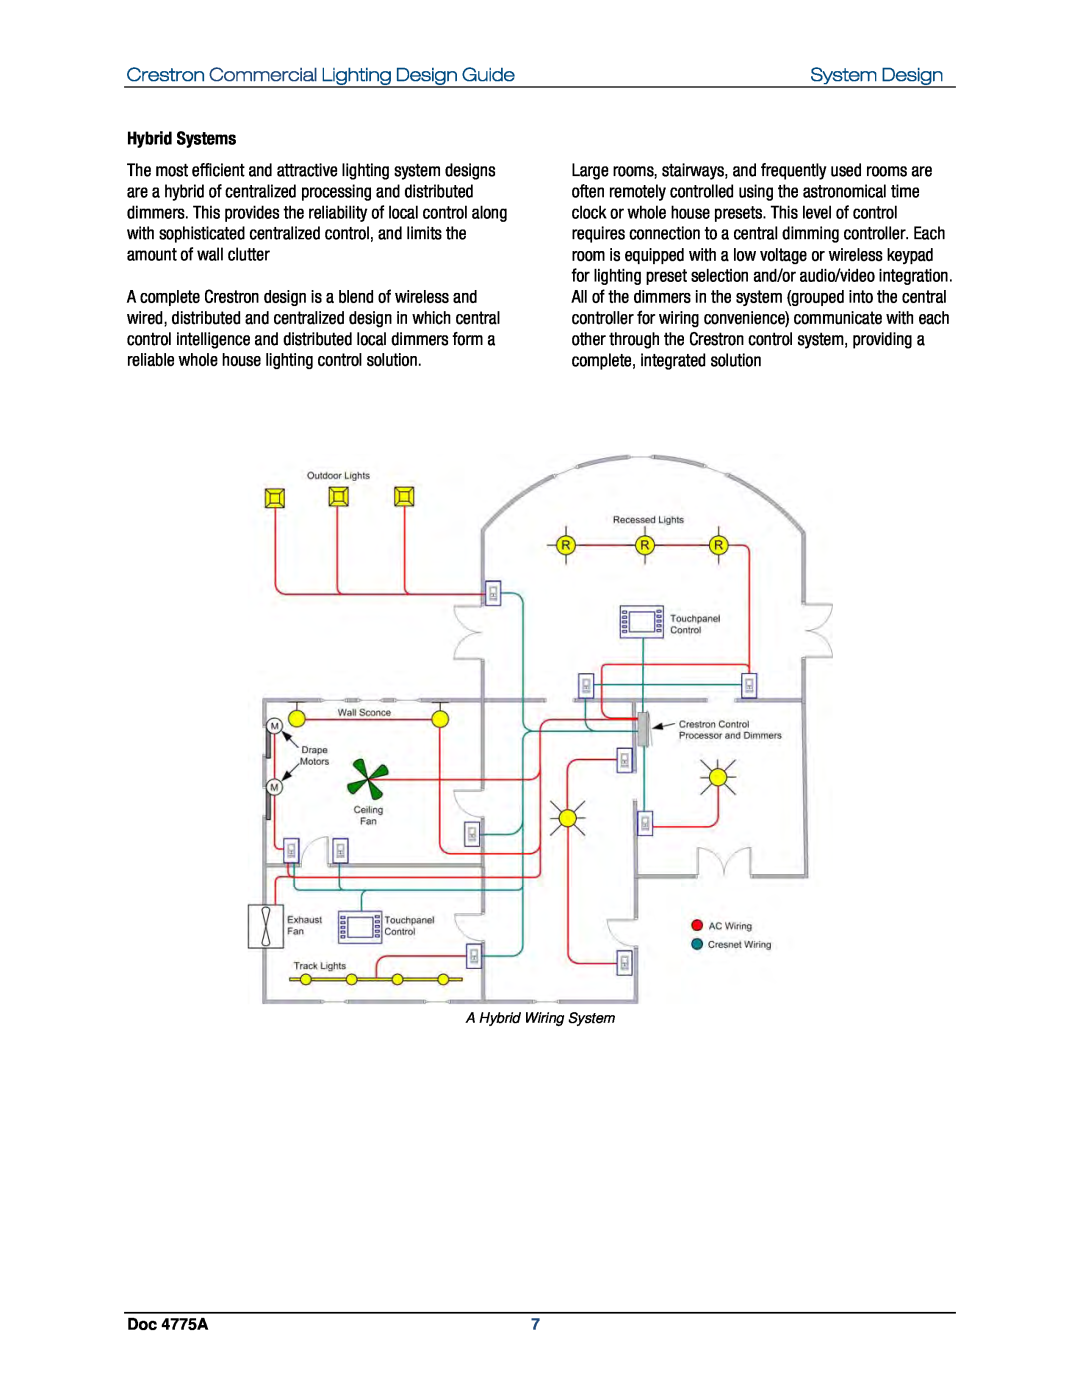 Crestron electronic GLPS-HSW-FT manual Hybrid Systems, Crestron Commercial Lighting Design Guide, System Design, Doc 4775A 